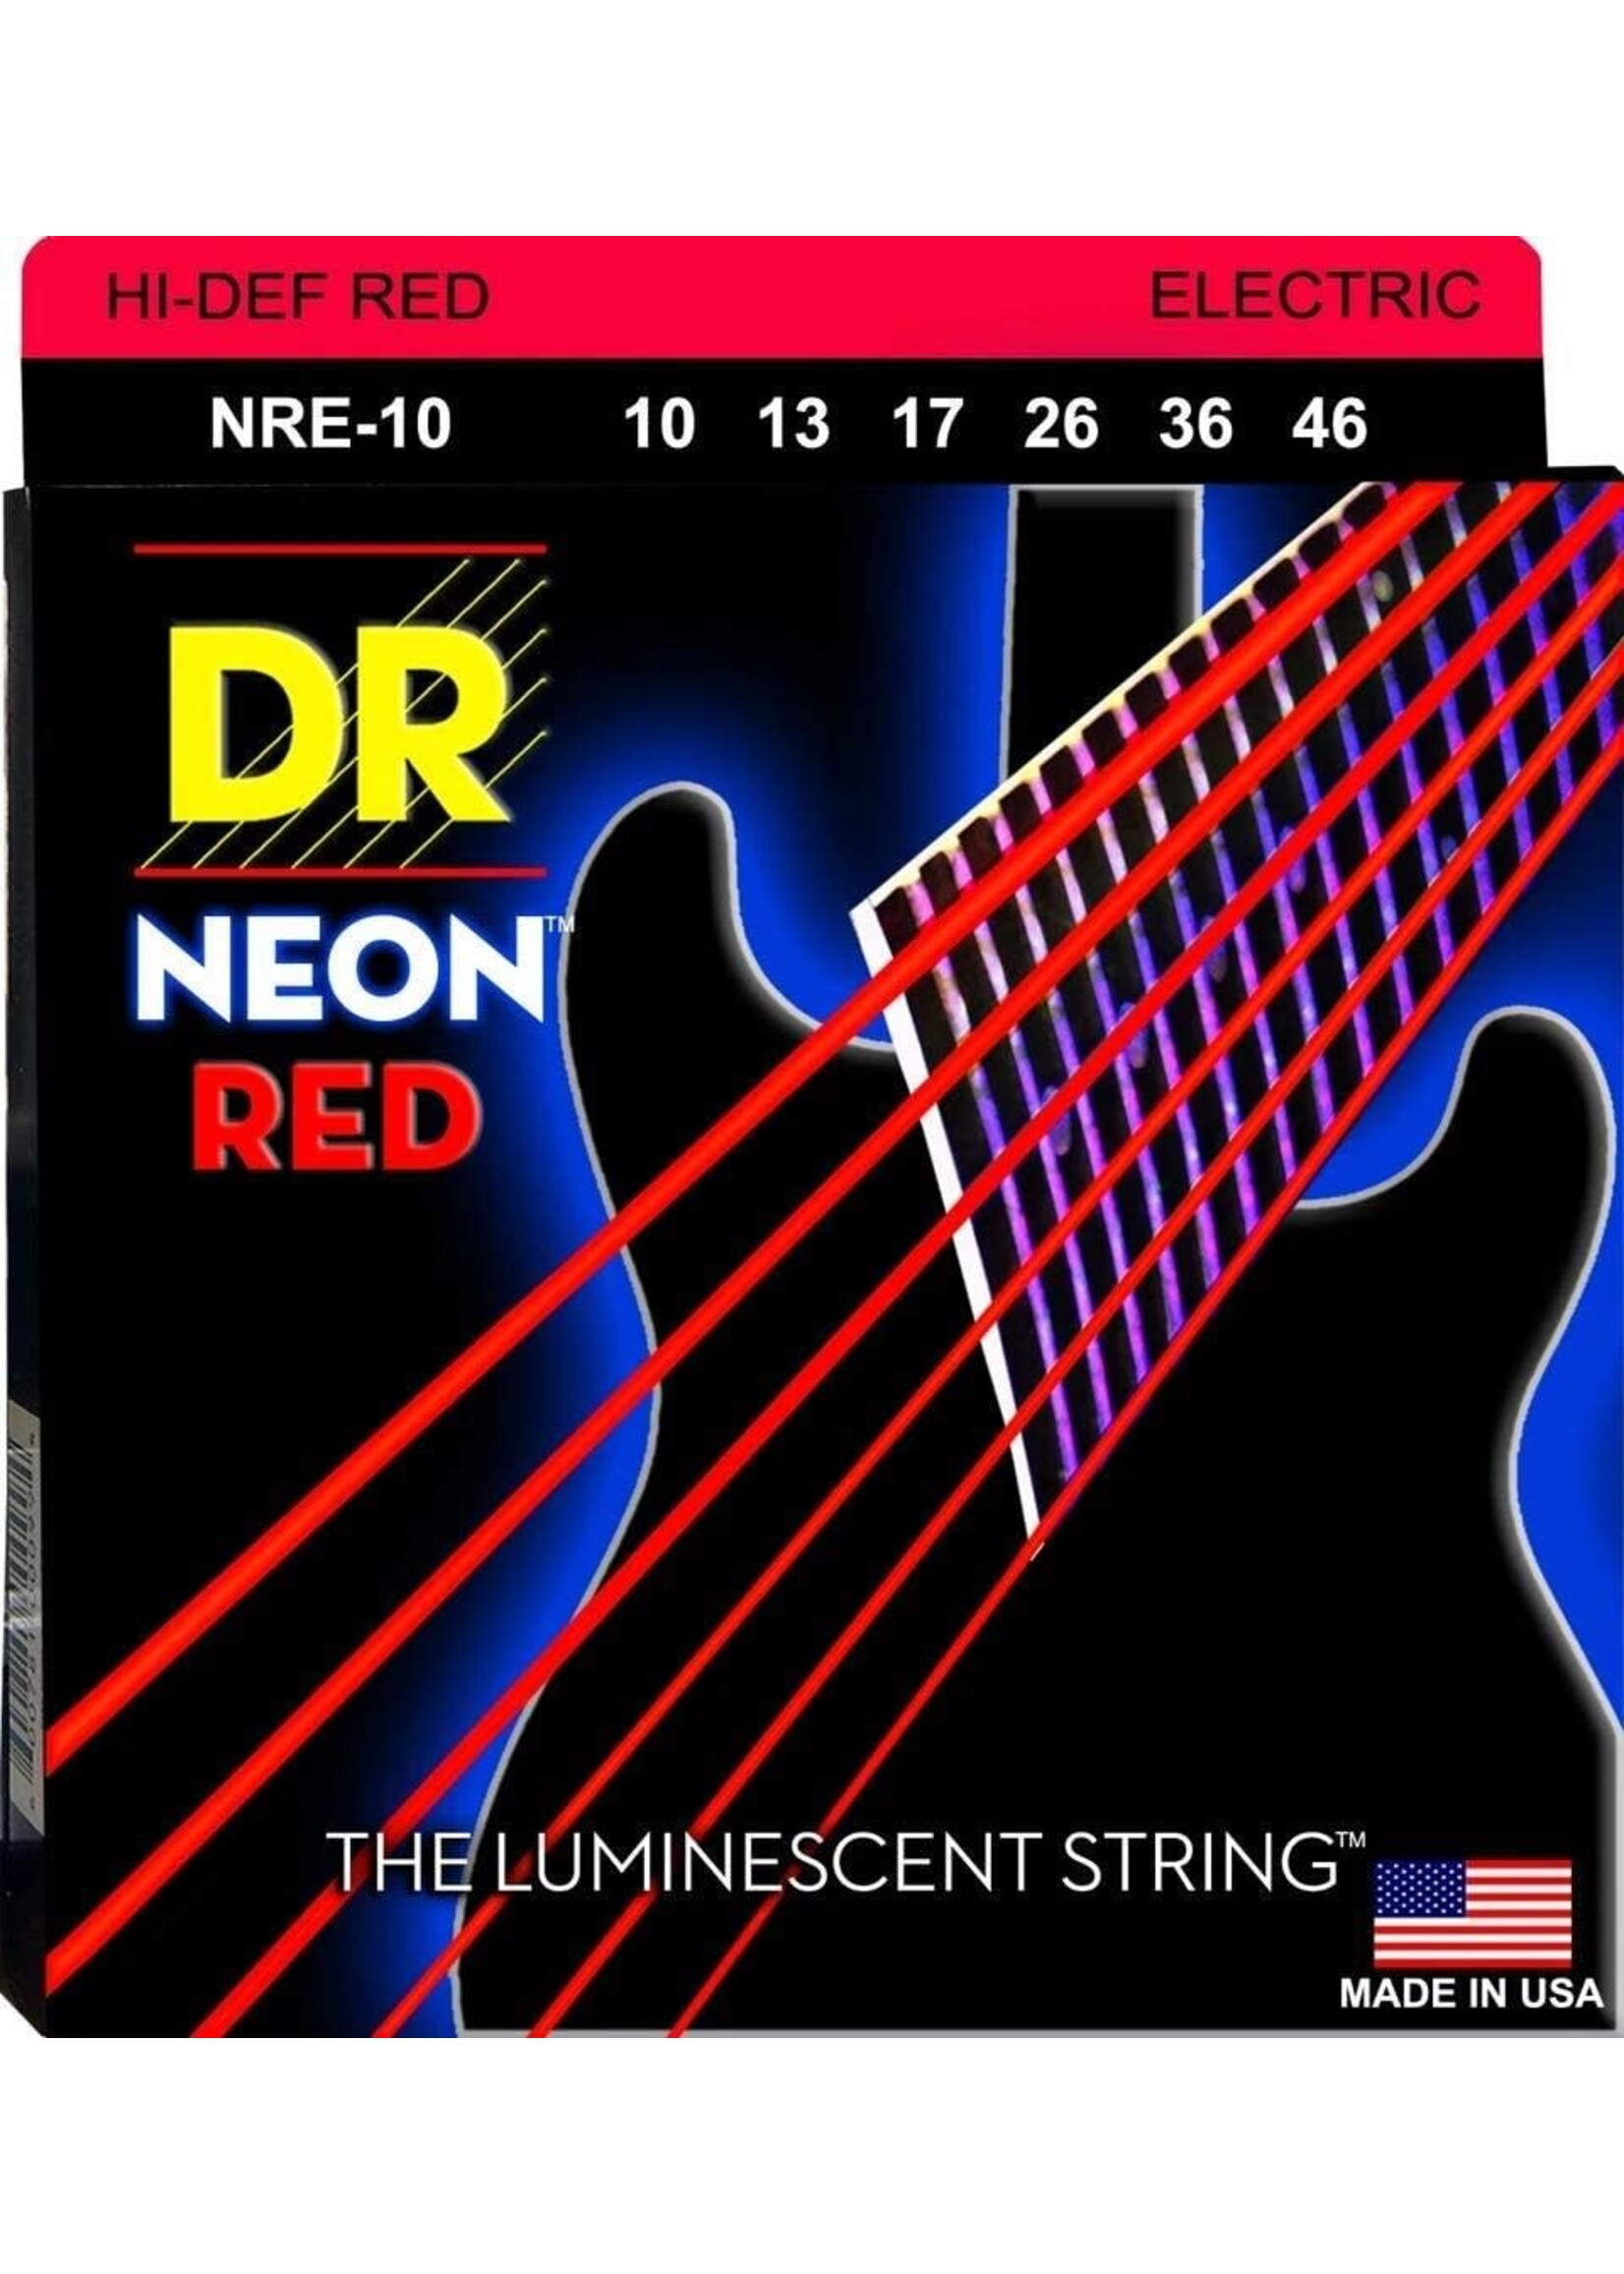 DR DR Neon Red Electric Guitar Strings